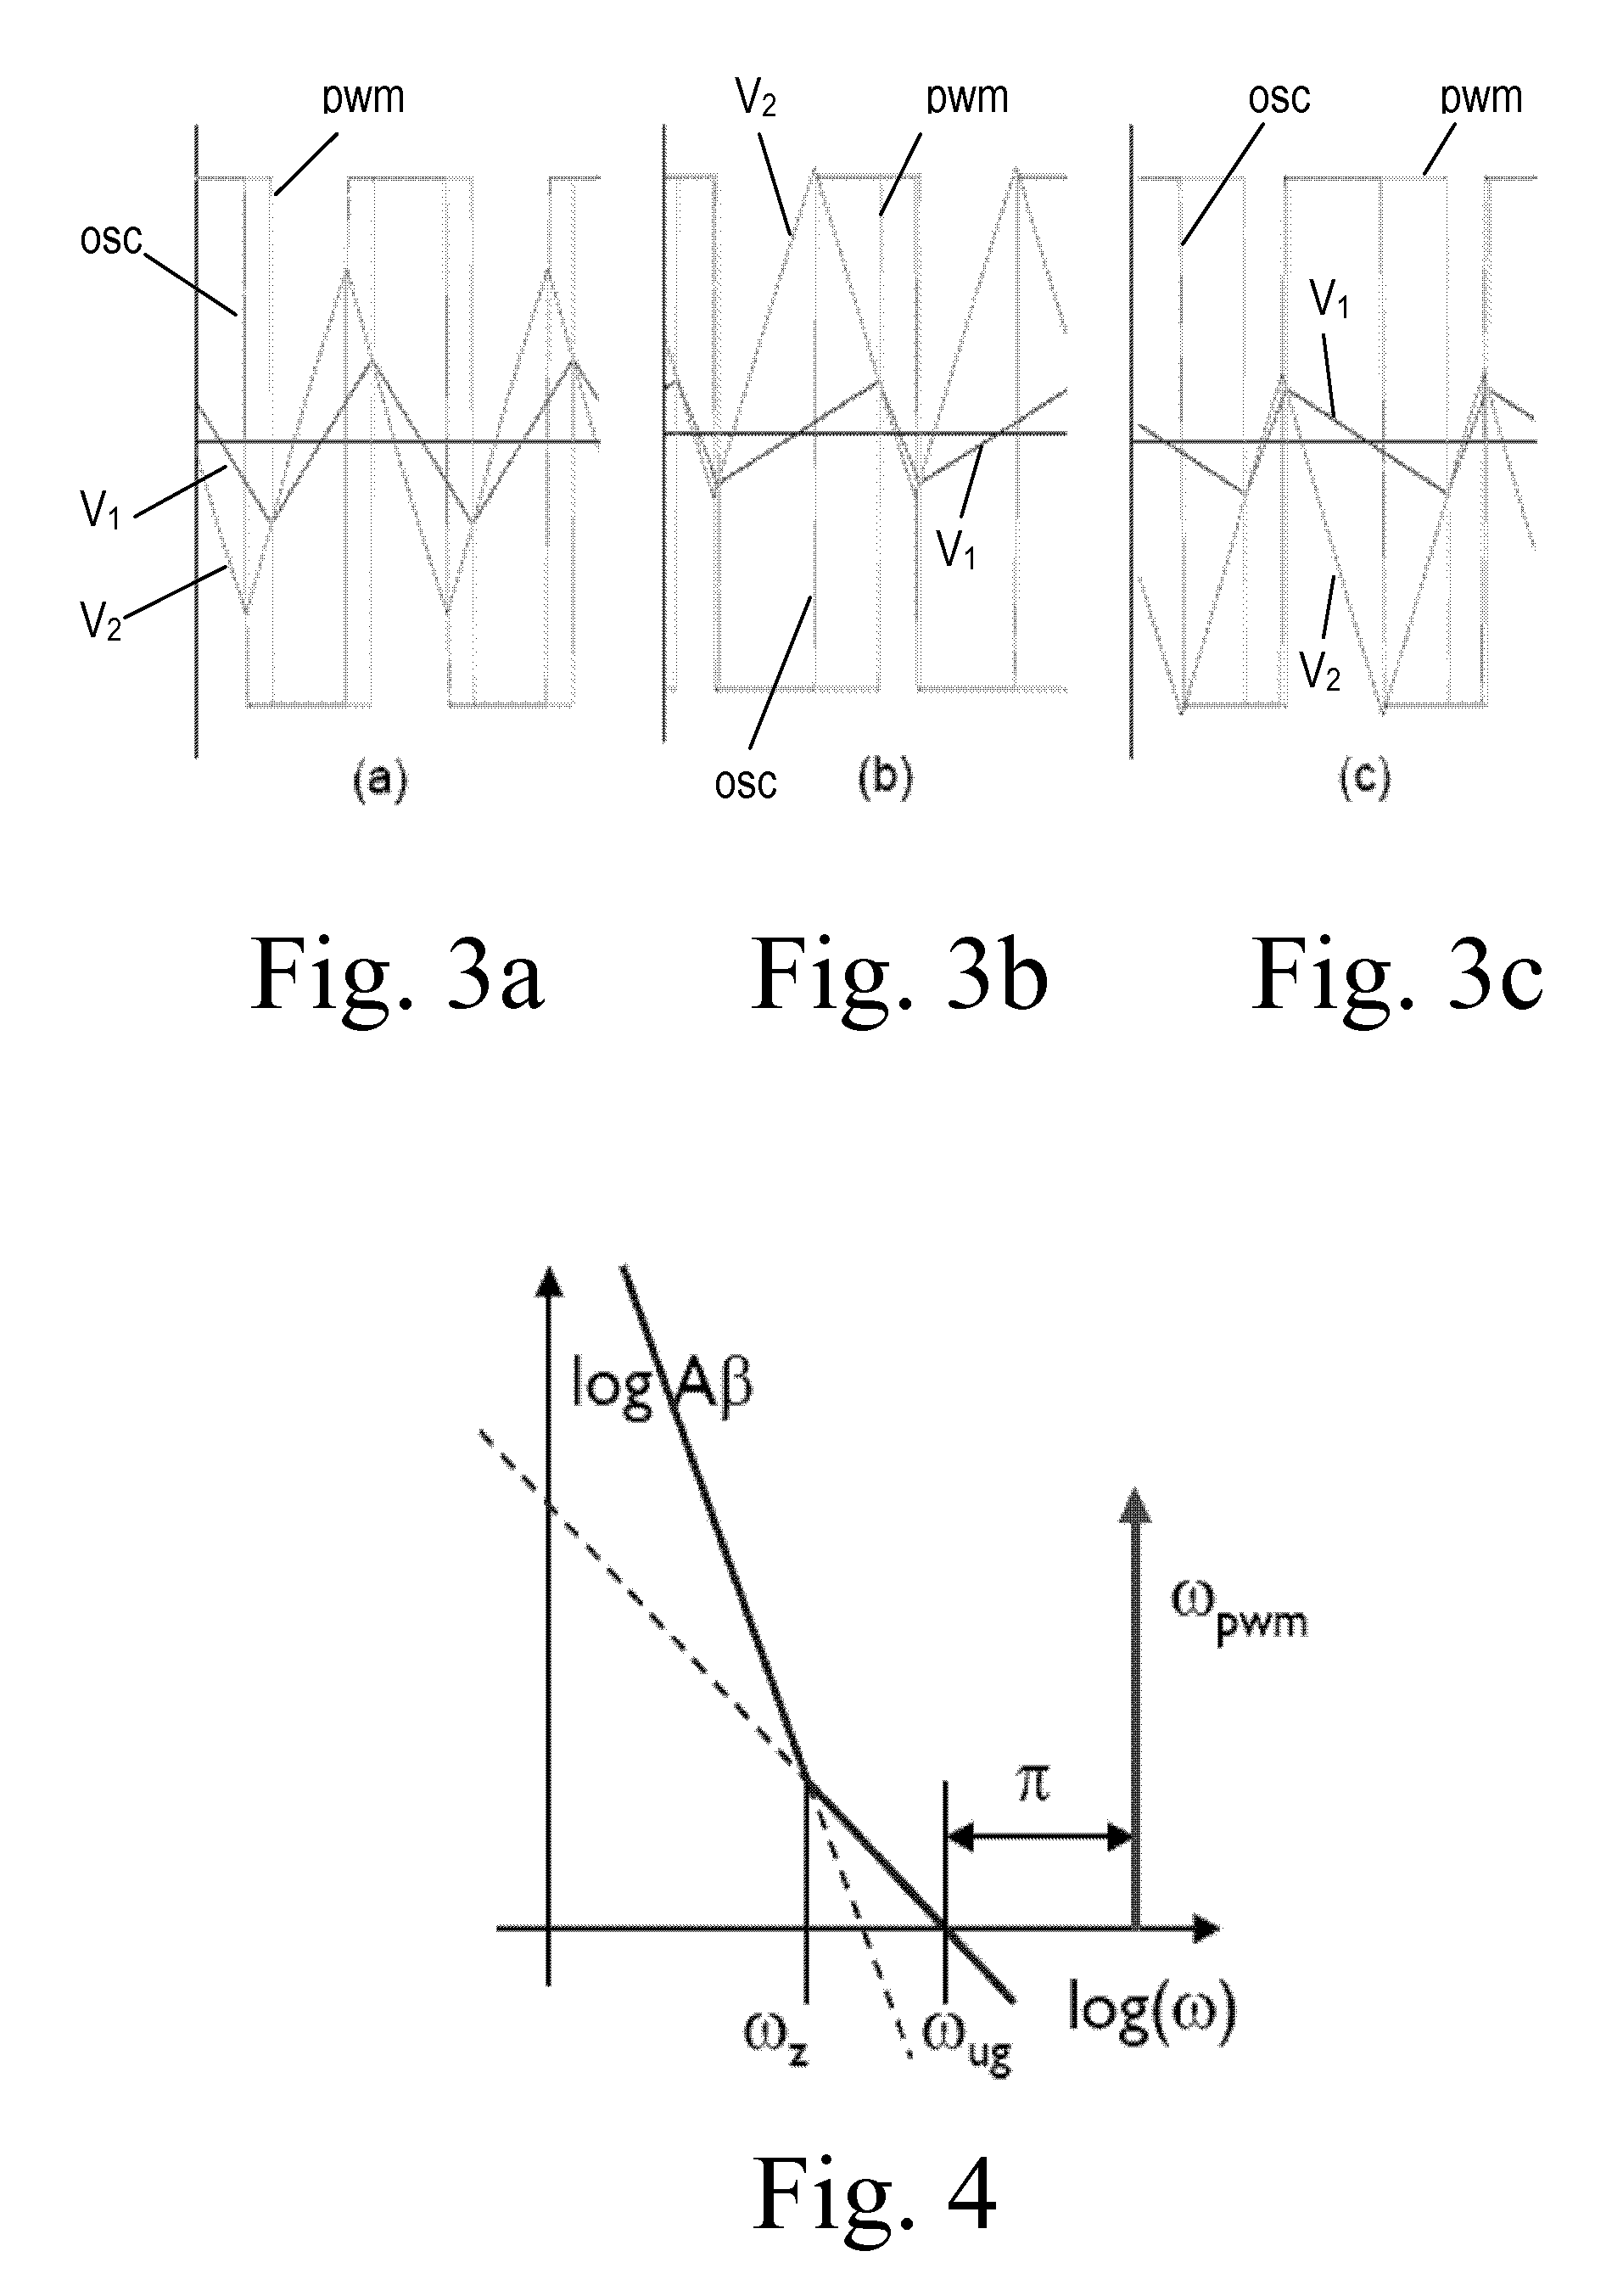 Pulse width modulation circuit and class-D amplifier comprising the PWM circuit